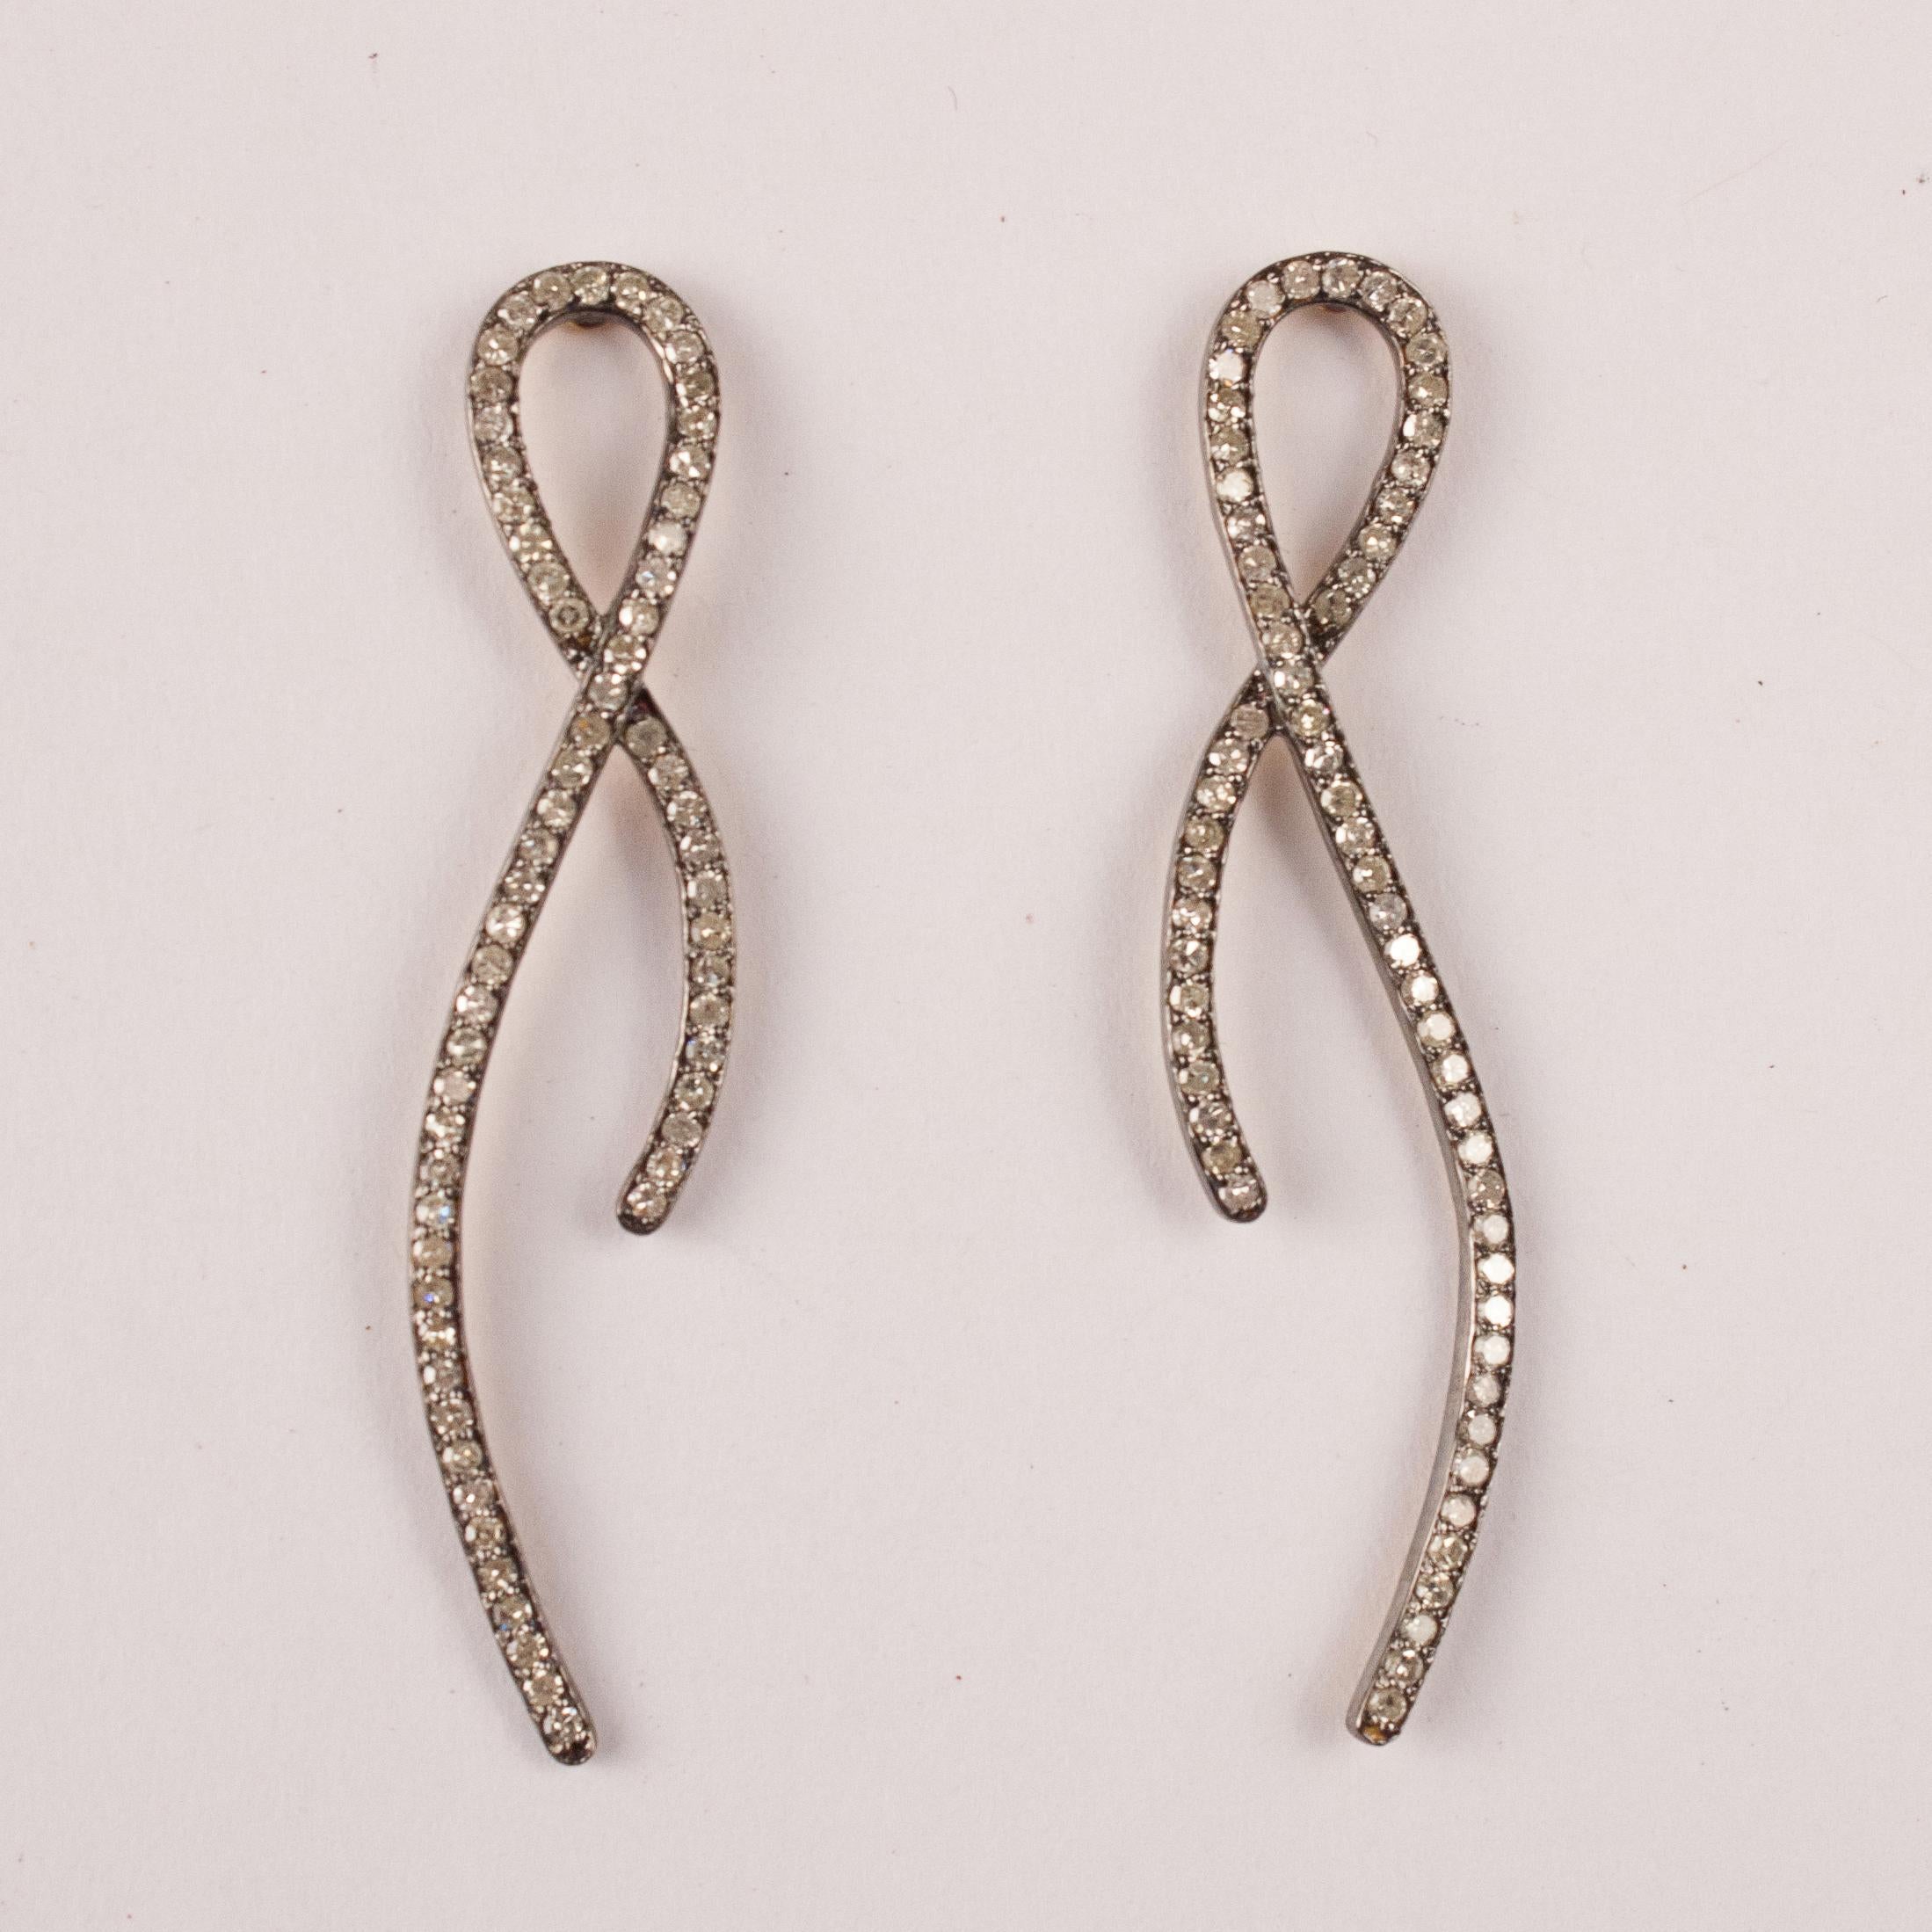 Very wearable diamond dangle earrings with a ribbon design. Each mirror-image earring features 61 flat-cut diamonds pave set in sterling silver with 14-karat gold posts and backs. Earring length is 2 inches.